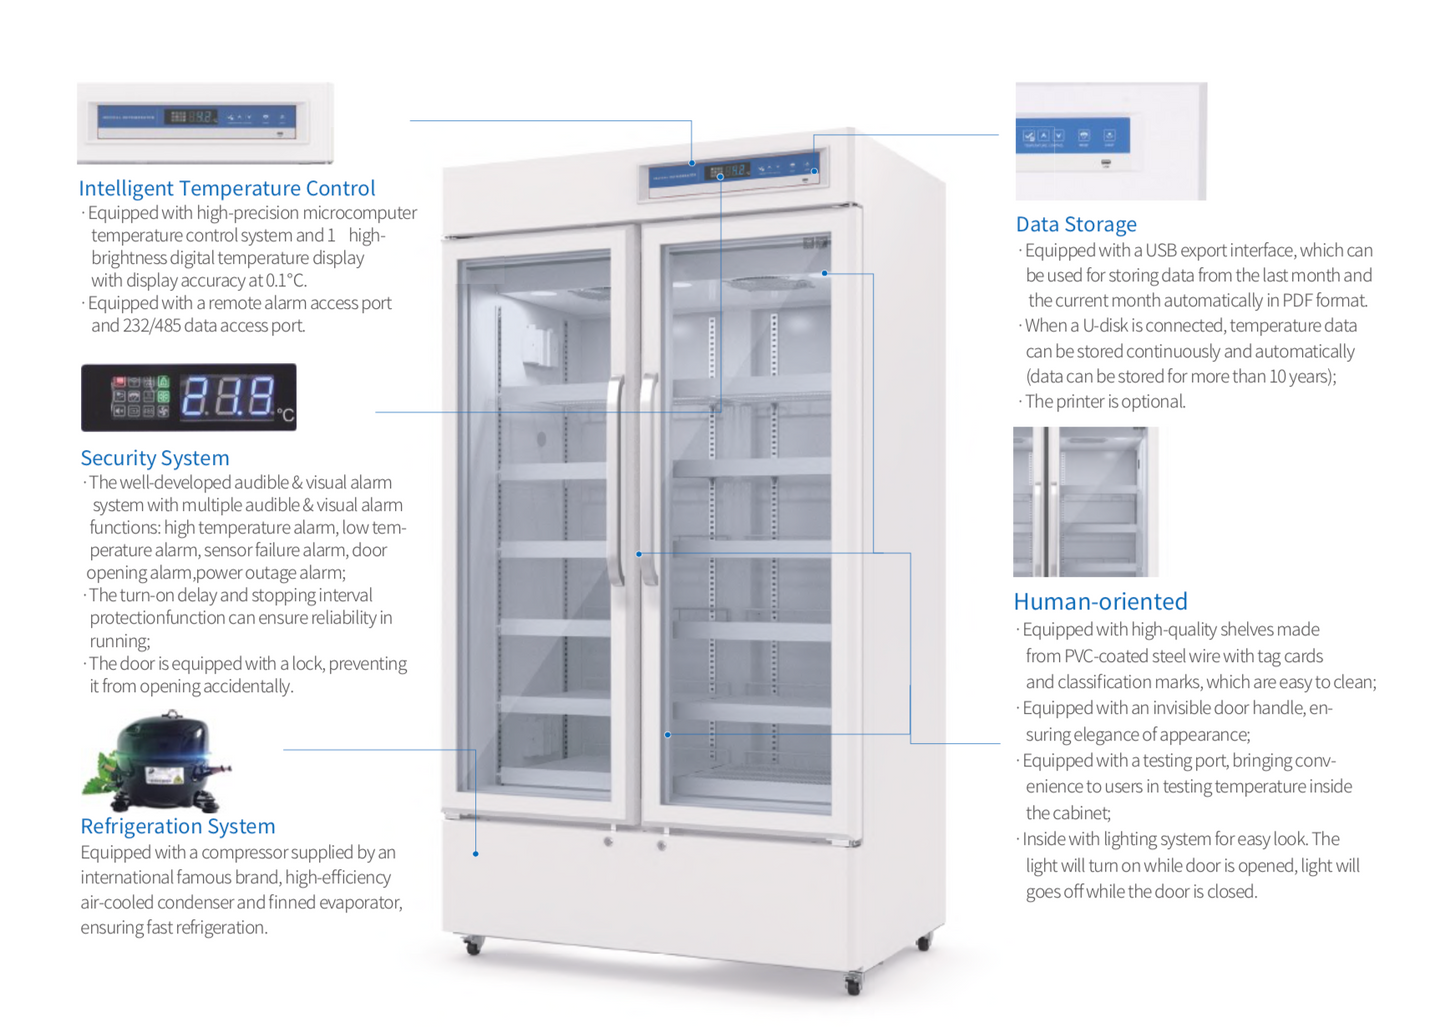 A white 2-door medical refrigerator with adjustable shelves and a digital temperature display.